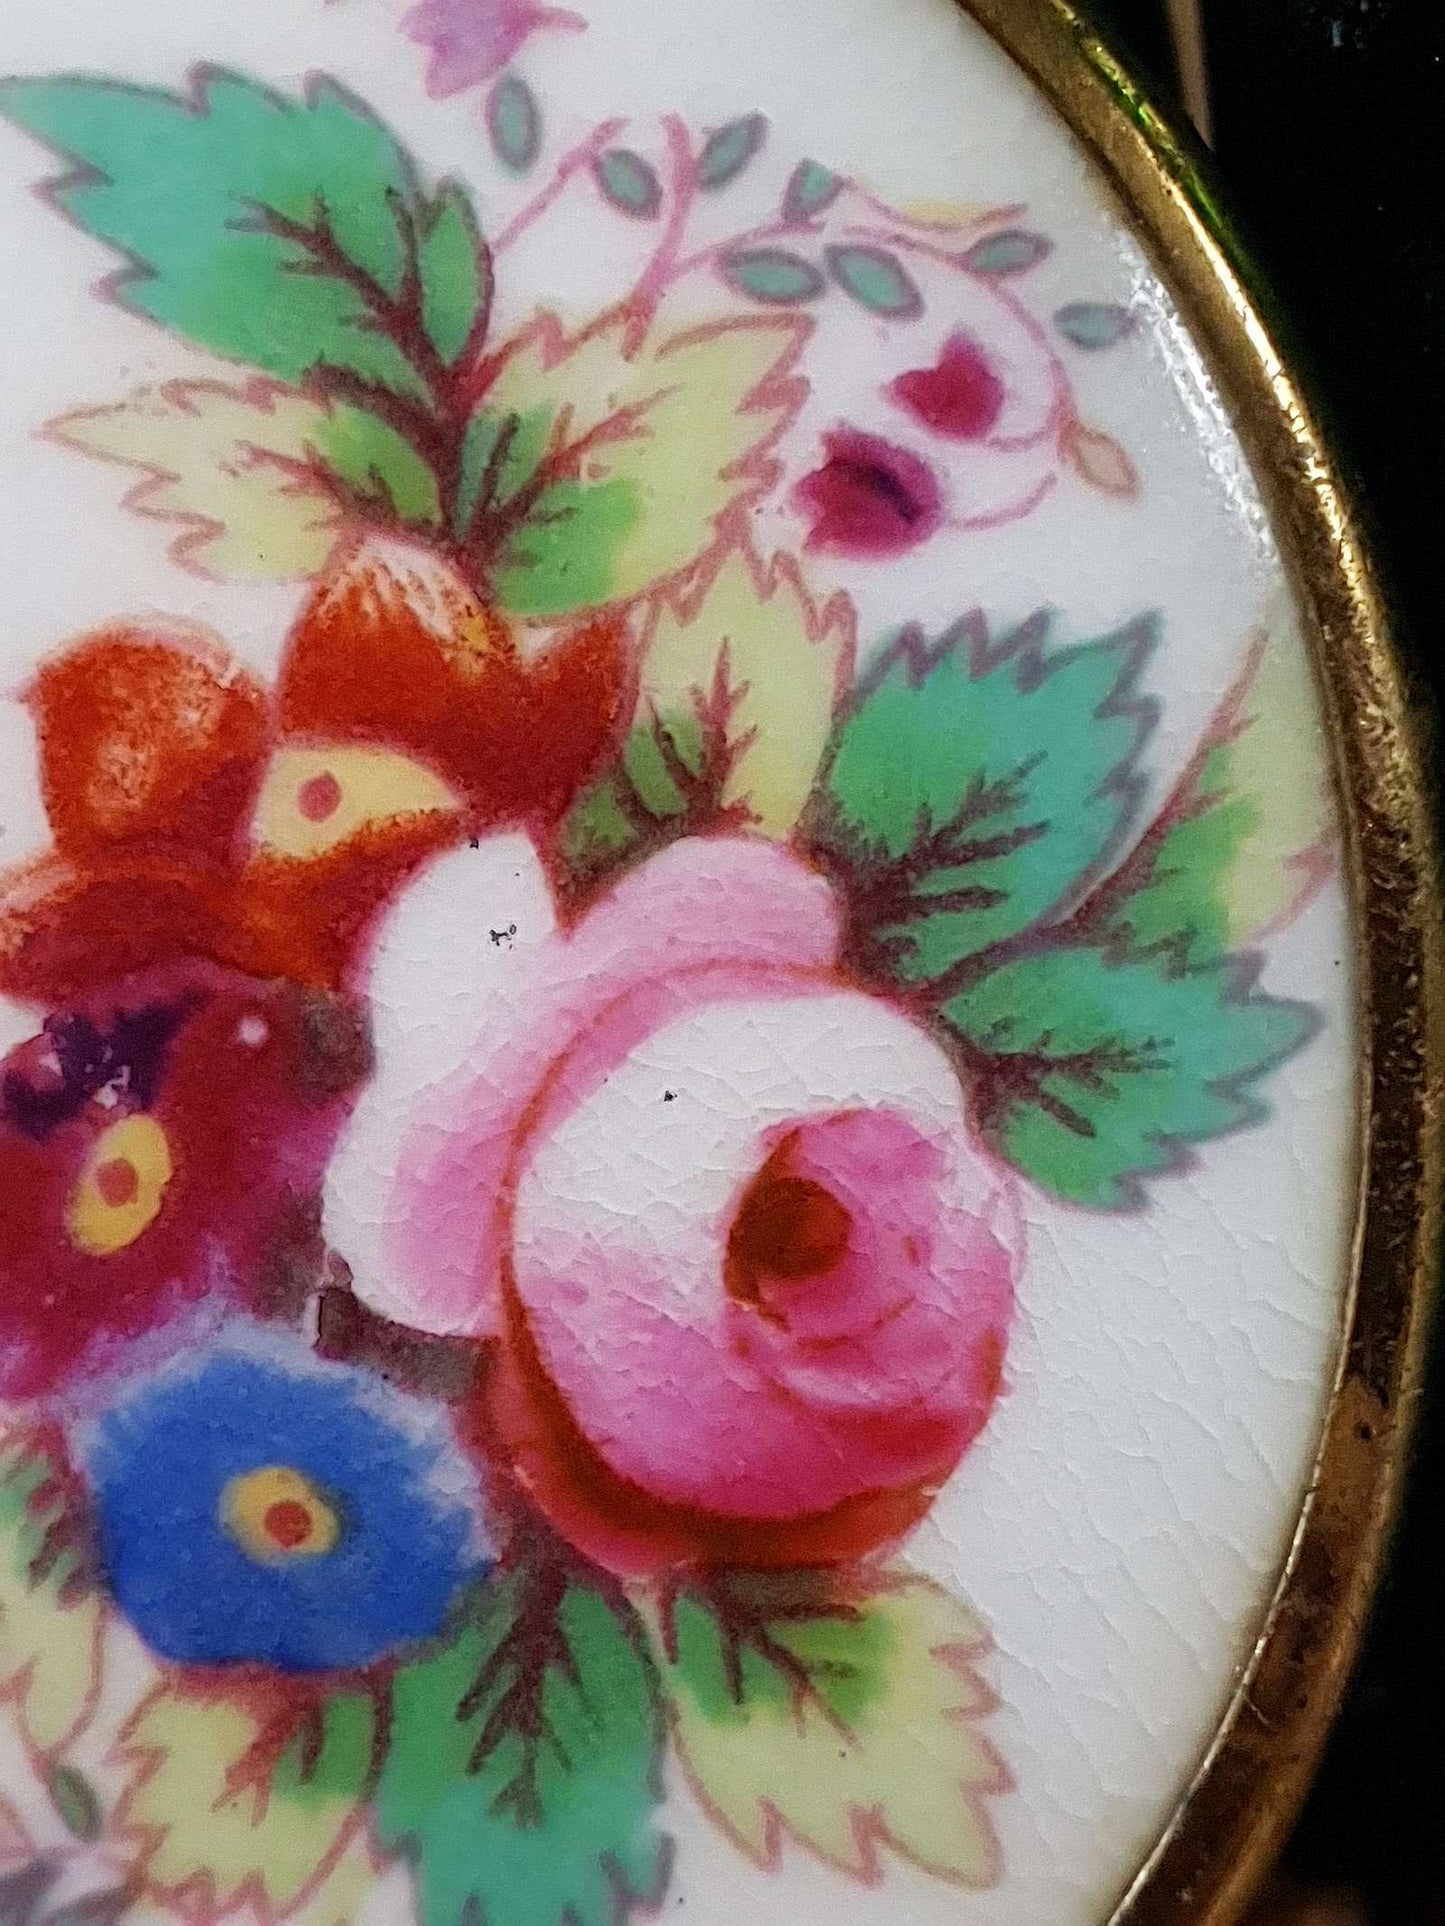 Vintage Royal Worcester Flower Brooch Pin 1950s Bone China Floral Hand Painted